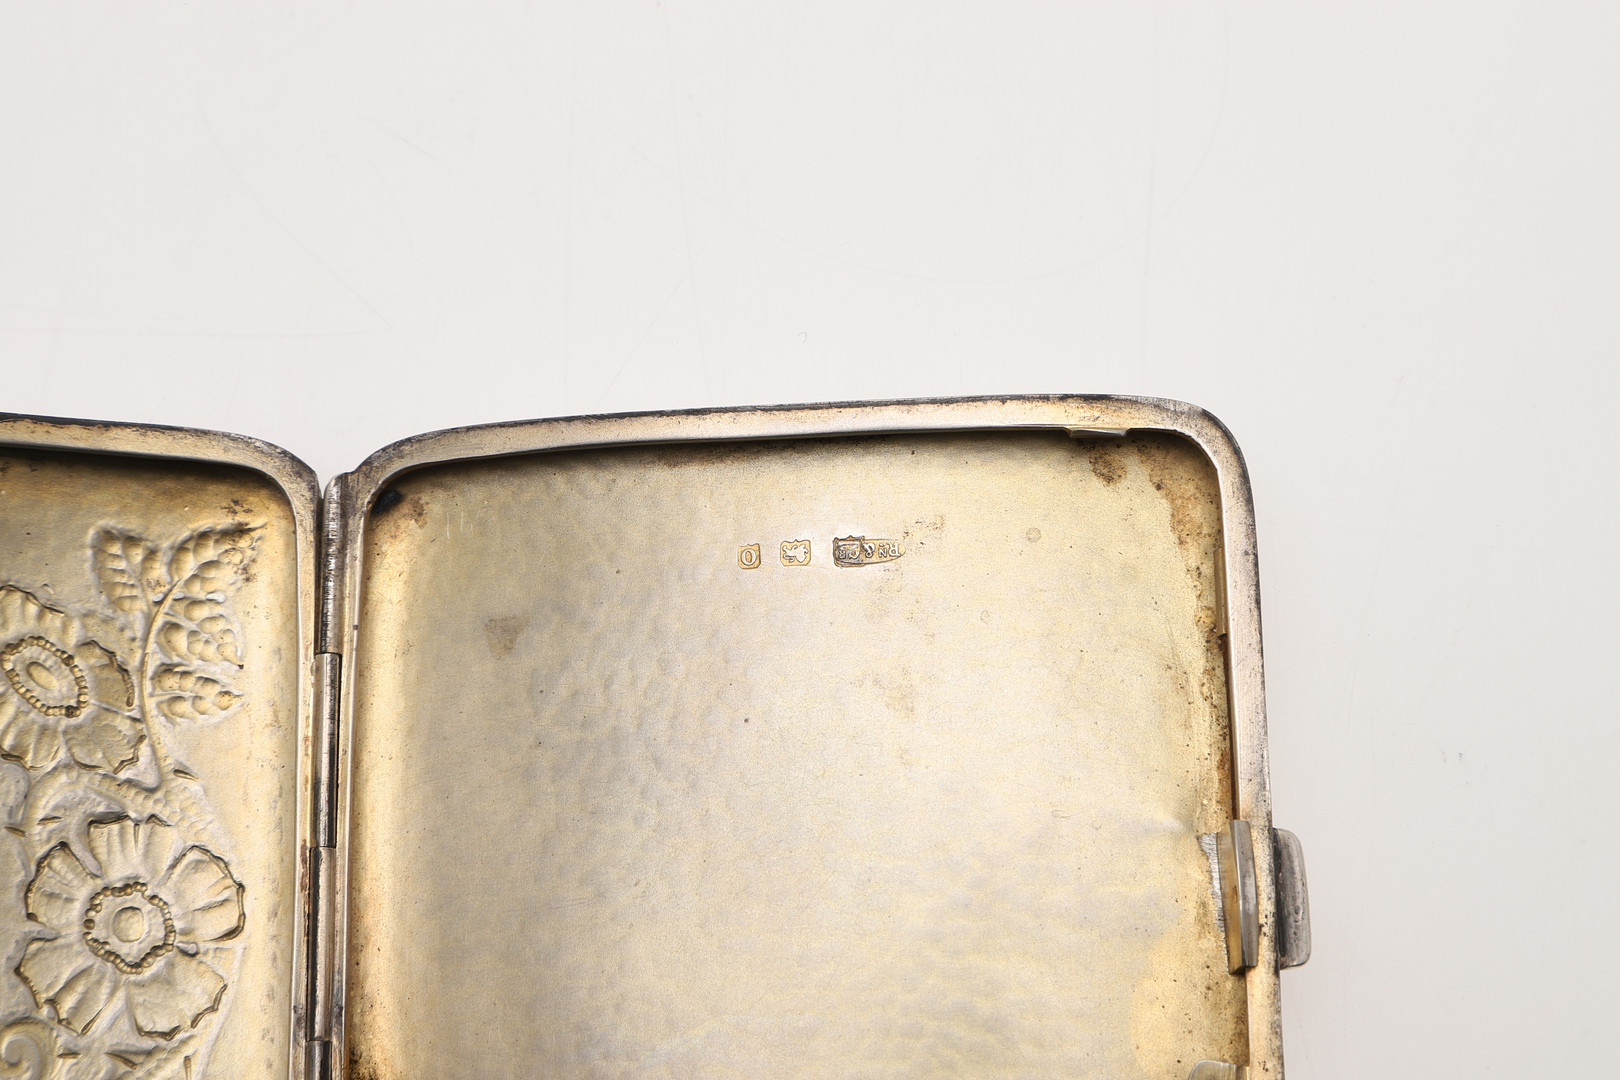 AN ARTS & CRAFTS SILVER CIGARETTE CASE, BY OMAR RAMSDEN & ALWYN CARR. - Image 4 of 4